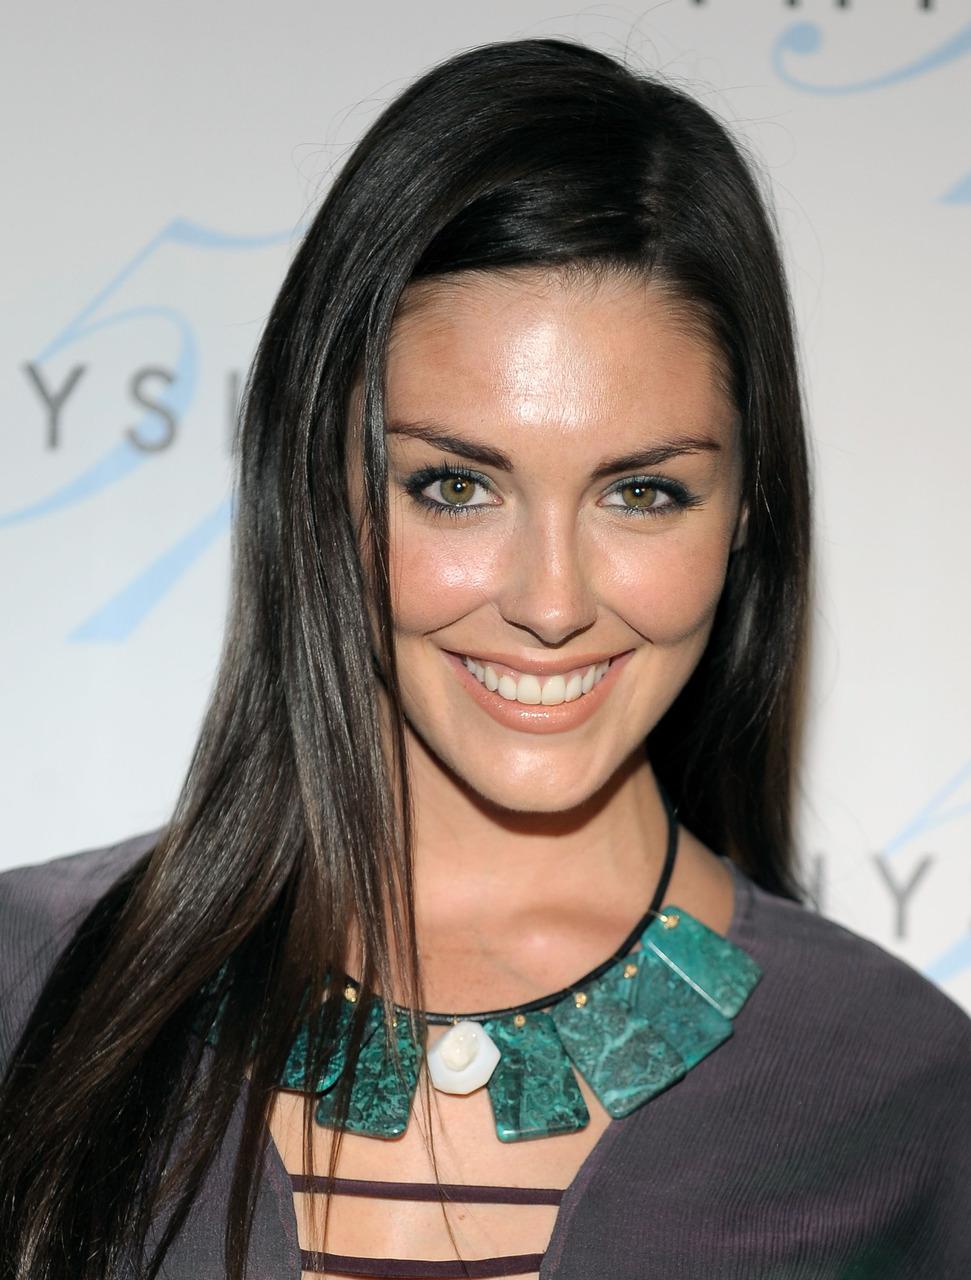 60+ Hot Pictures Of Taylor Cole Which Will Make Your Day | Best Of Comic Books